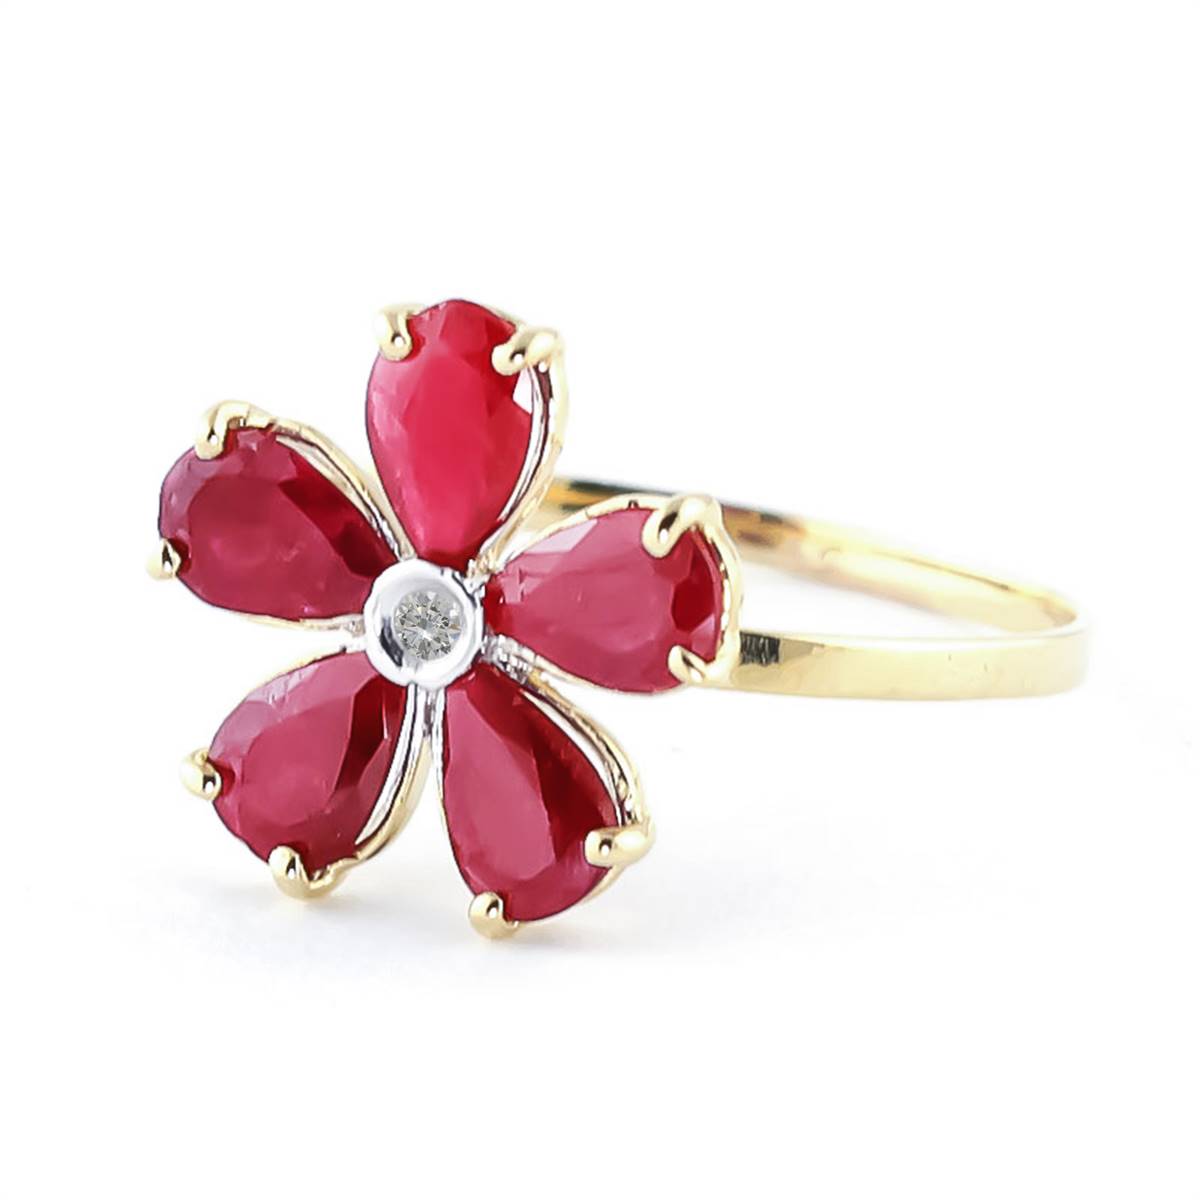 2.22 Carat 14K Solid Yellow Gold Fits Like A Glove Ruby Diamond Ring